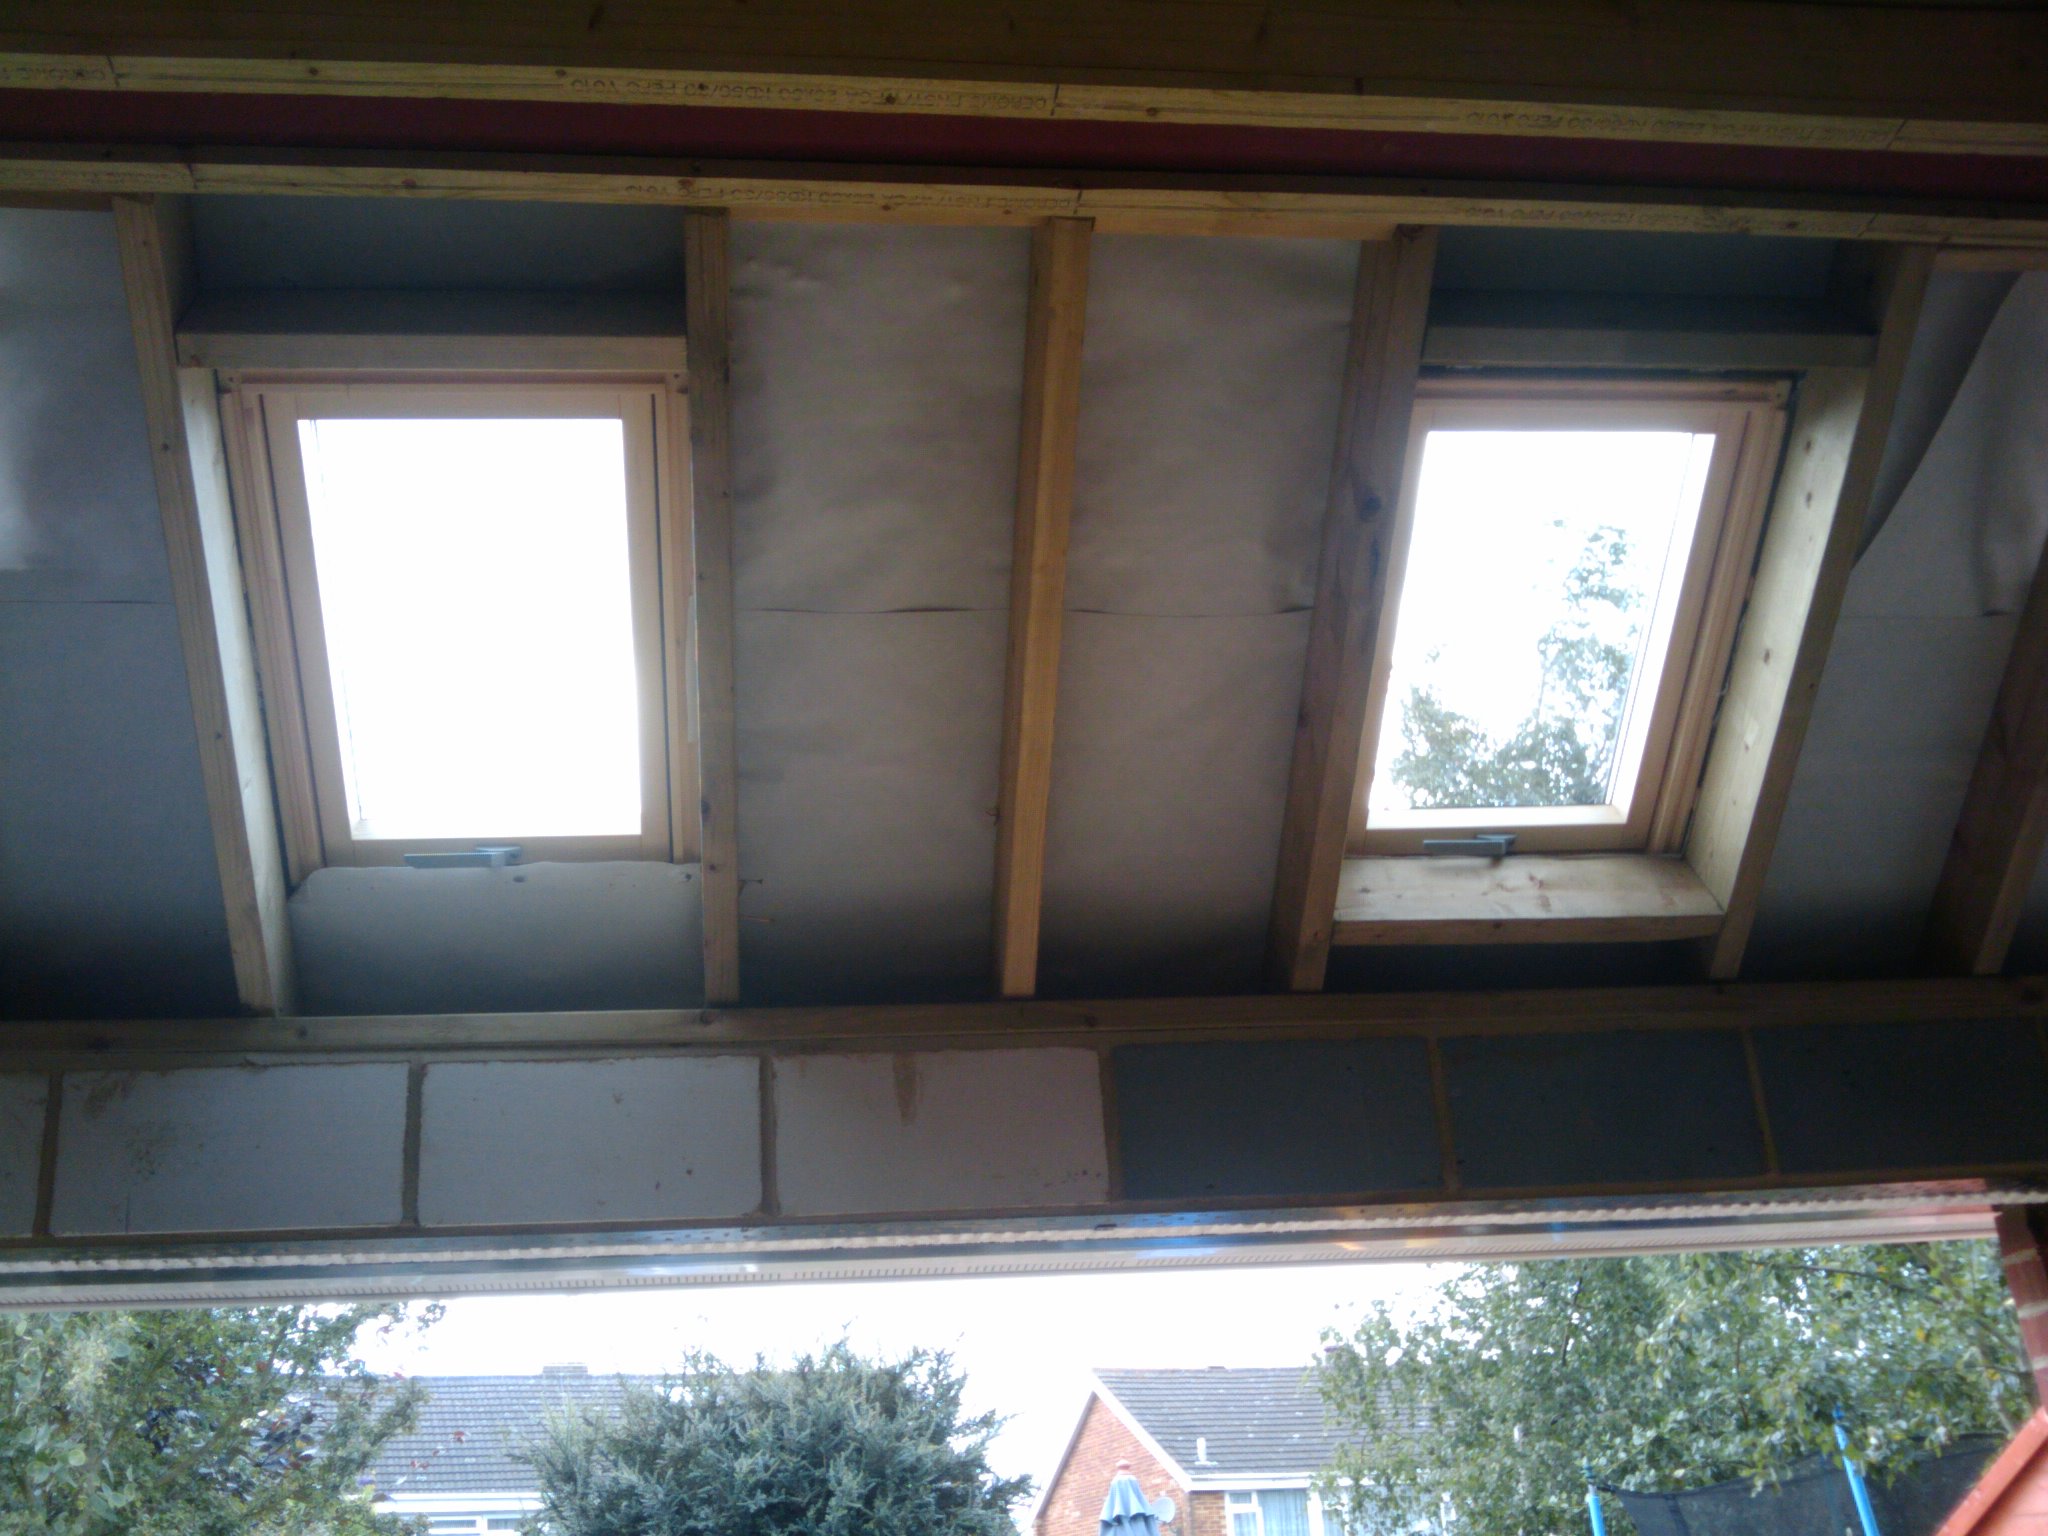 Insulating The Vaulted Ceiling Roof My Extension